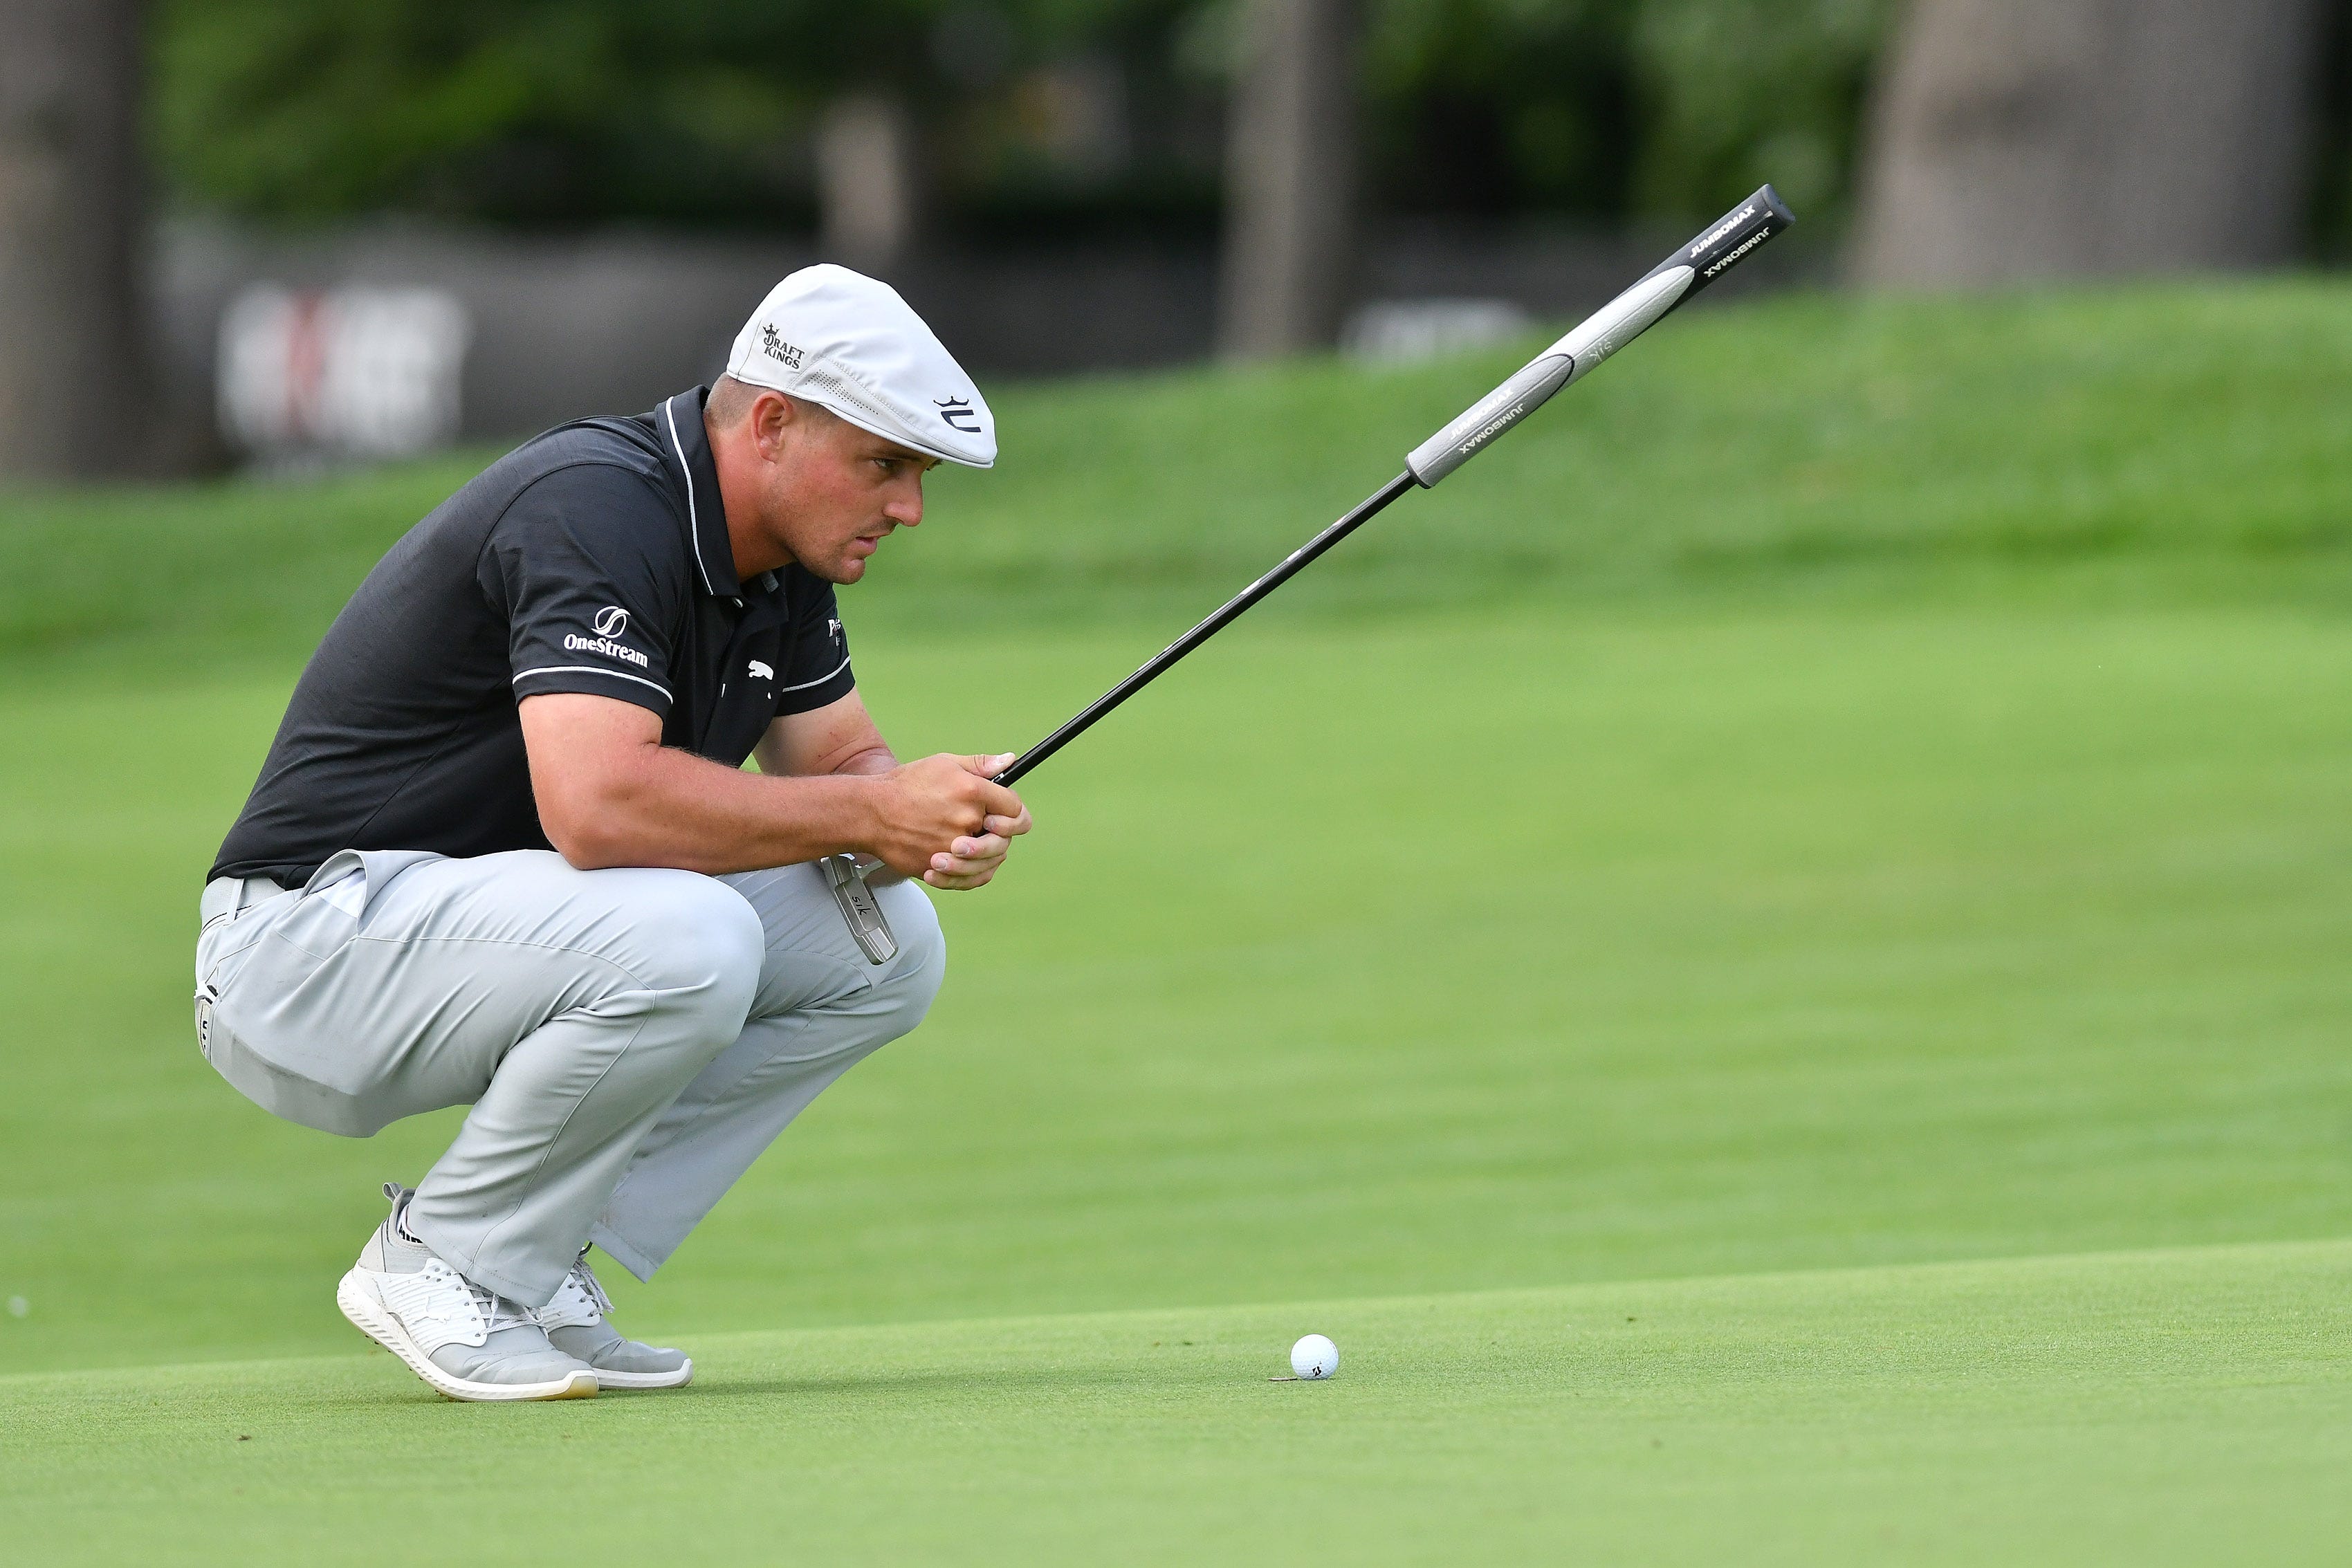 Bryson DeChambeau lines up his putt on the 9th green in Round 1.